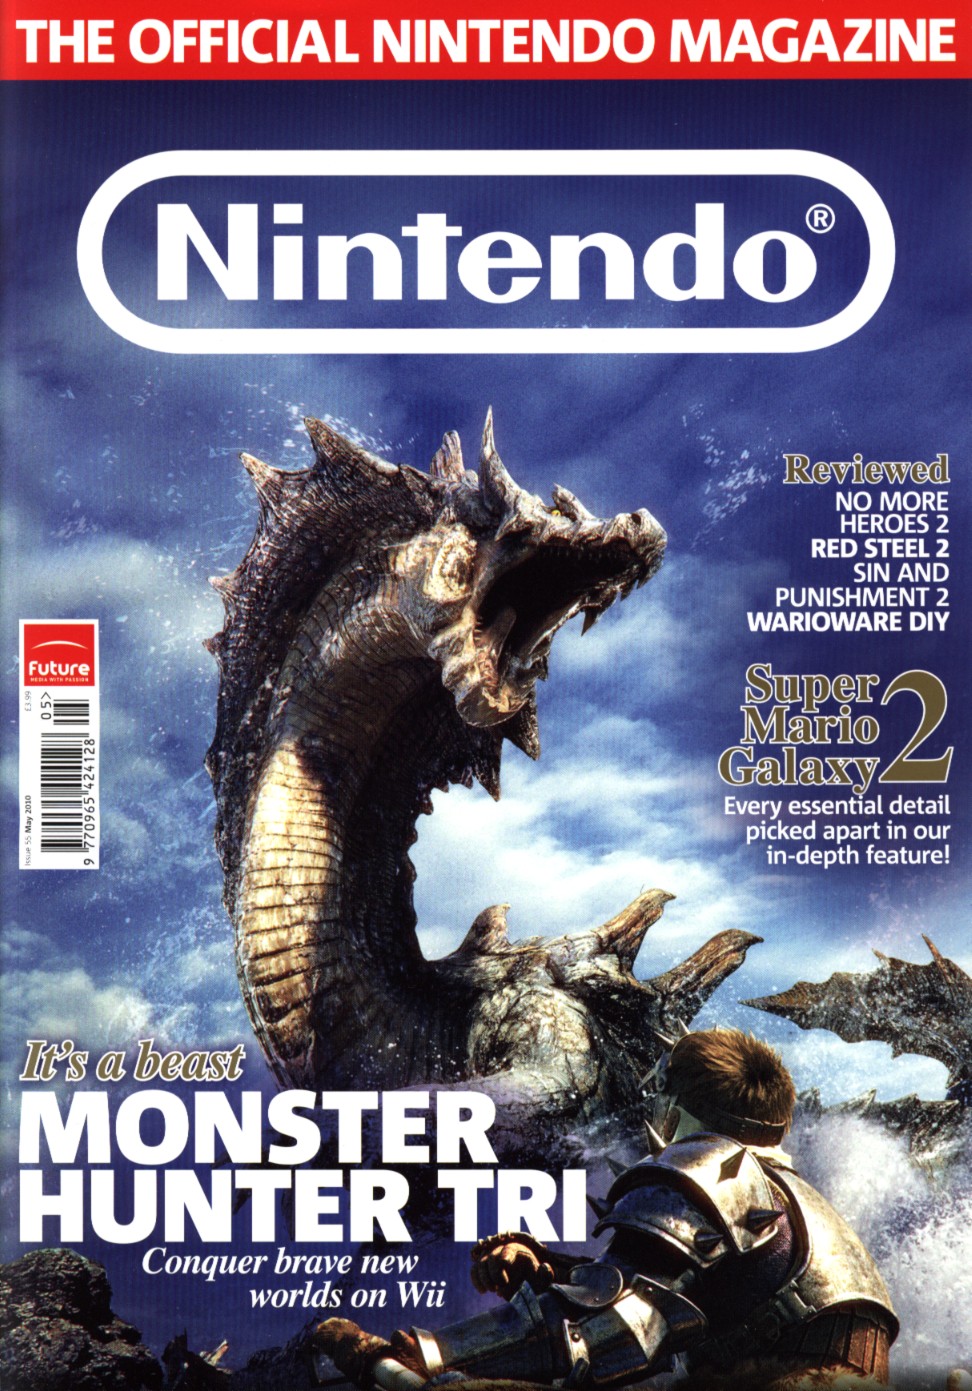 Image Official Nintendo Magazine Issue 55.jpg Magazines from the